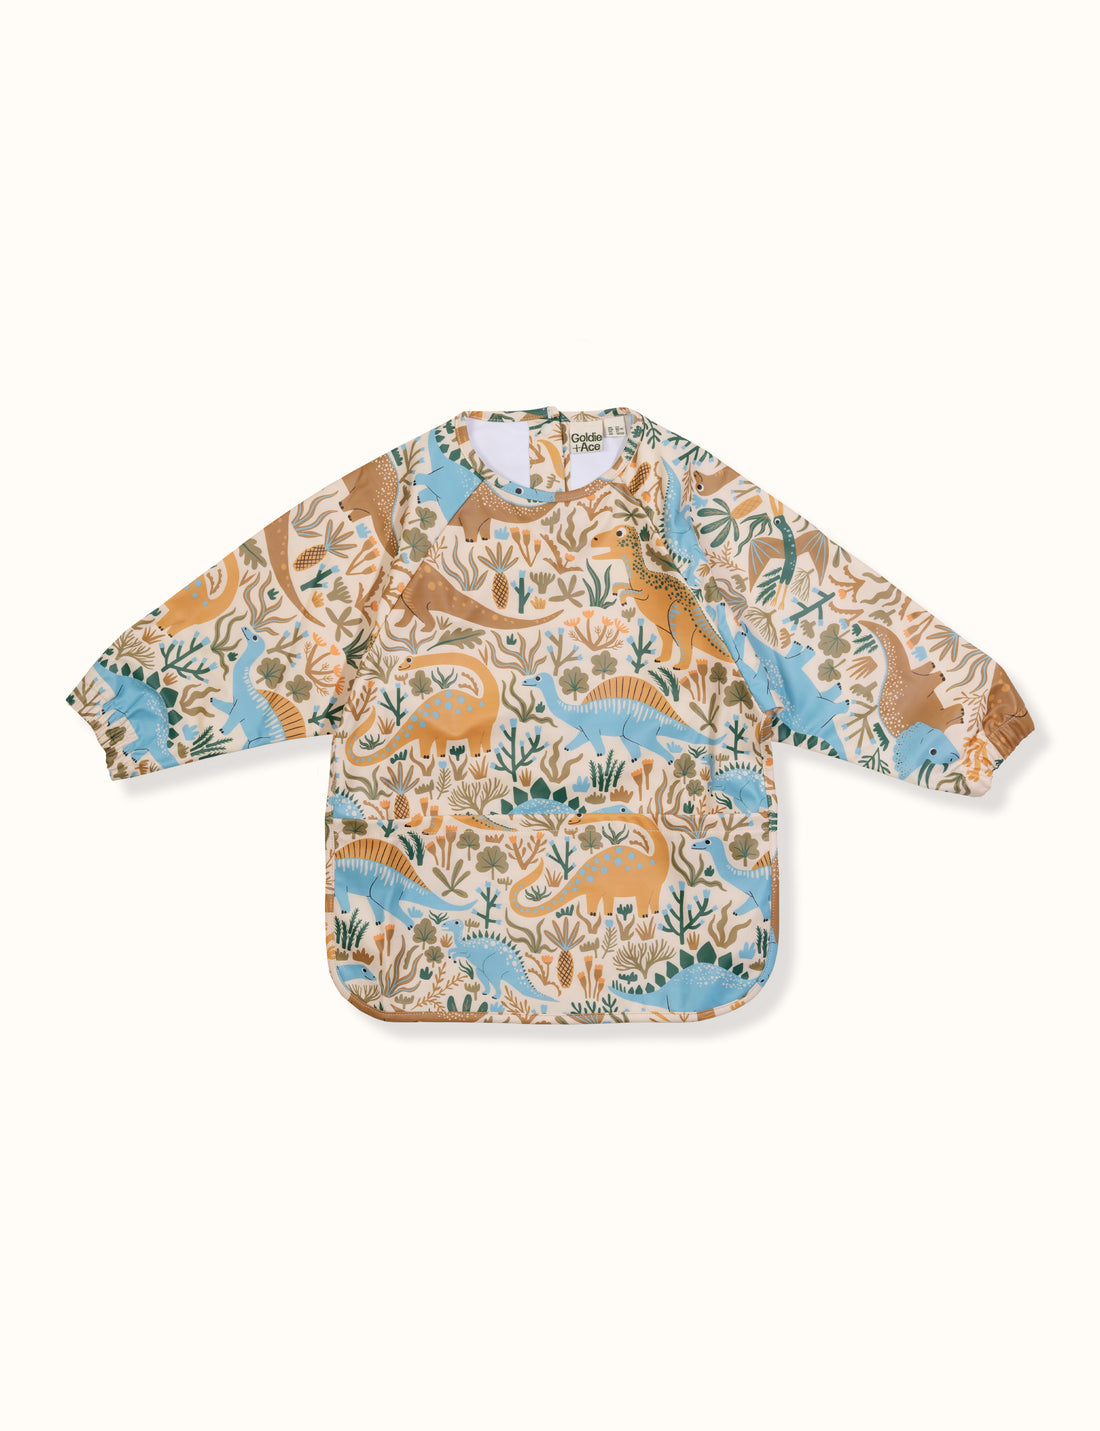 Goldie + Ace: Vintage-Style Kids, Toddler & Baby Clothing Online